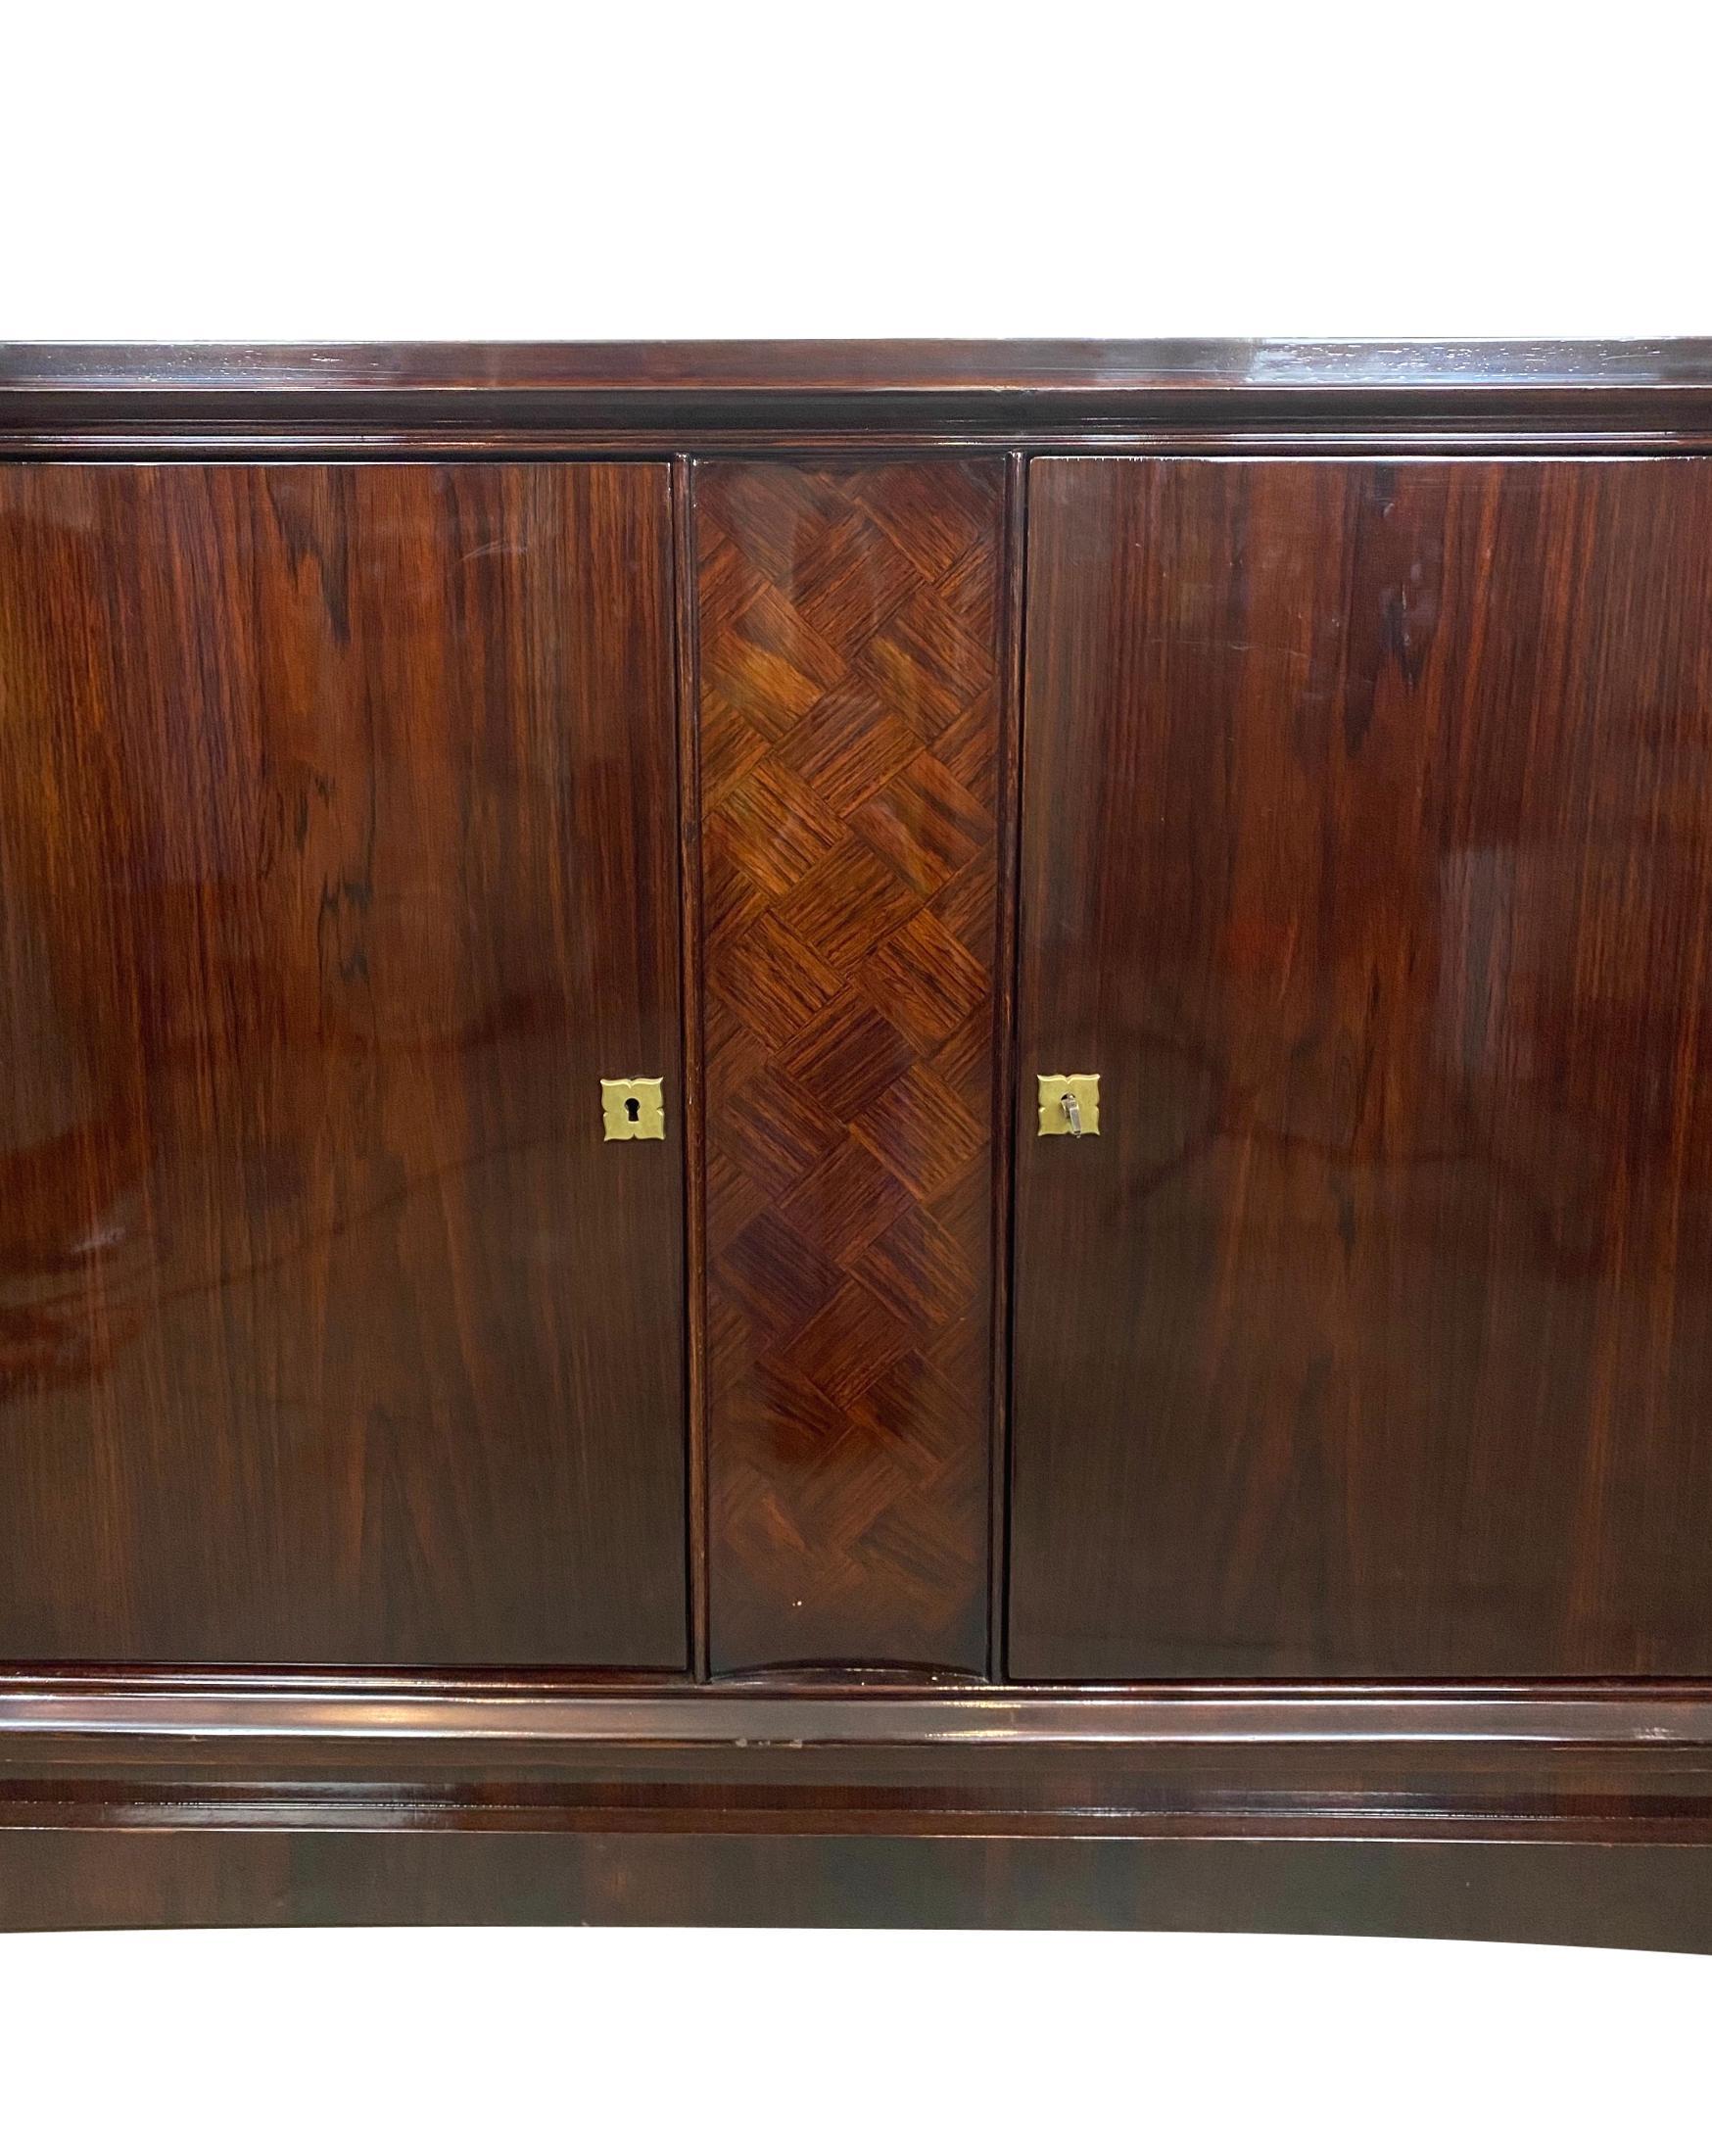 Hollywood Regency rosewood credenza, with inlaid parquetry, the interior lined with satinwood, on a recessed plinth with stylized, flared feet, with gilded bronze escutcheons and original key.